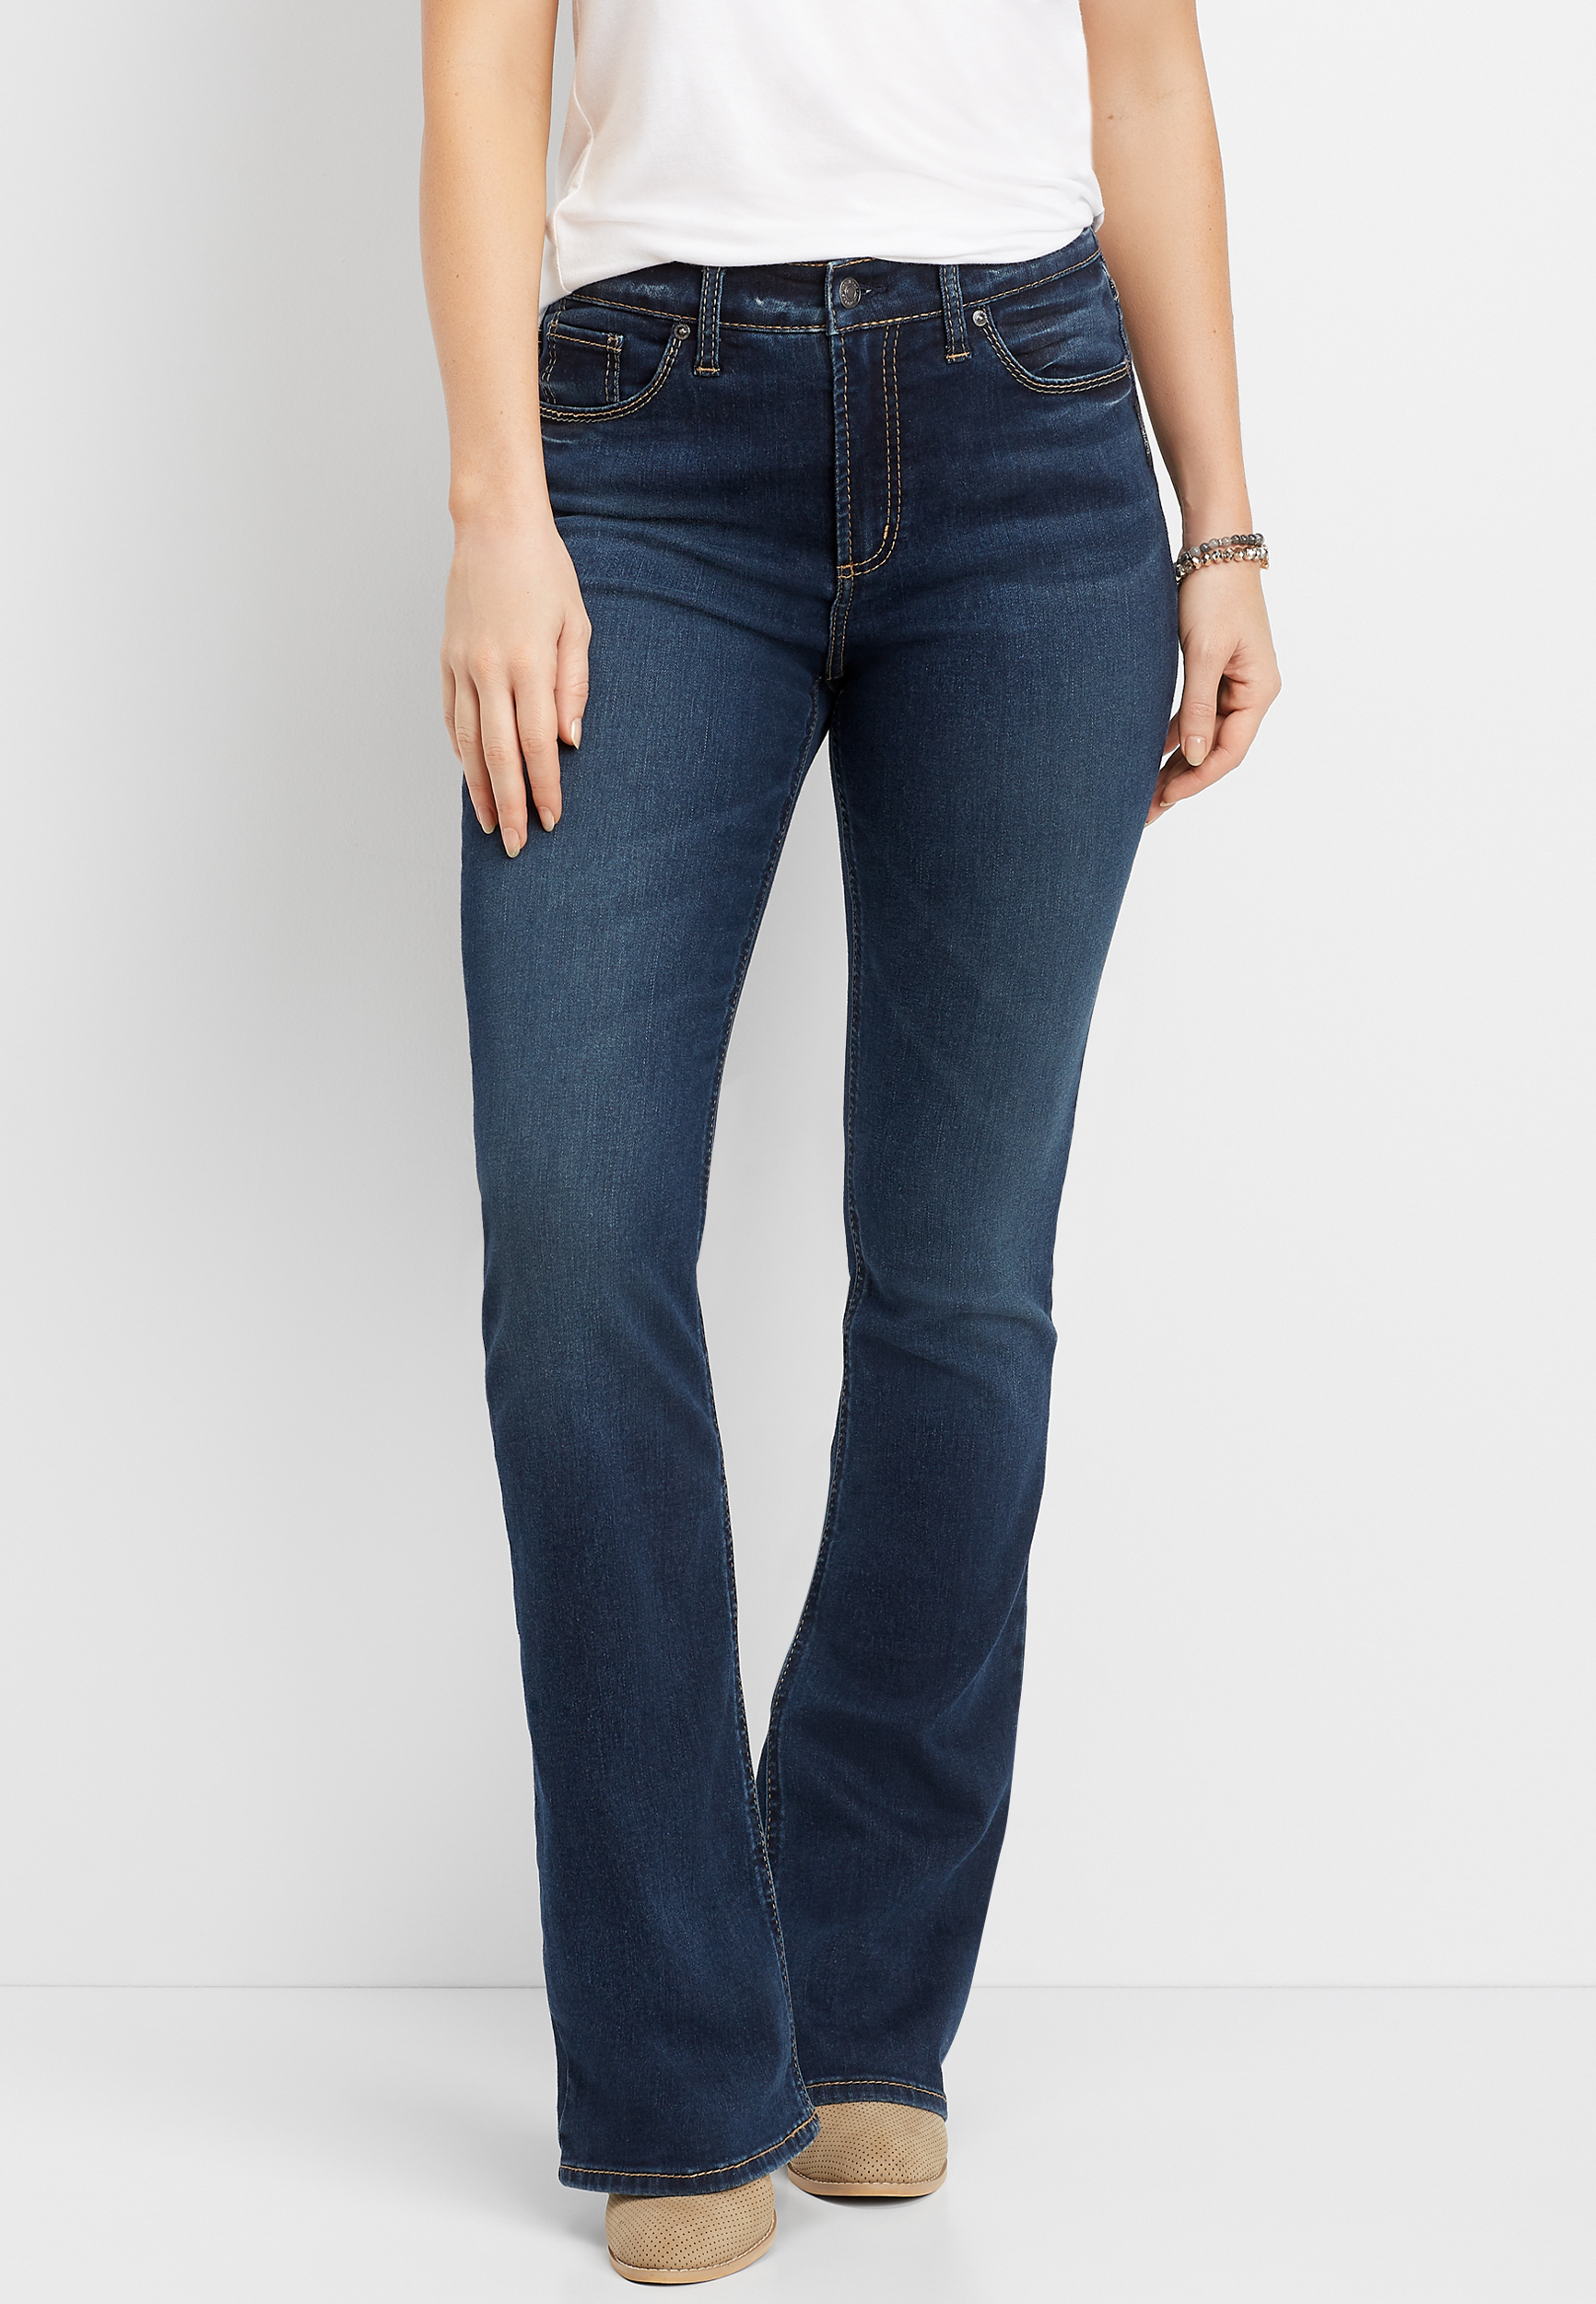 Silver Jeans Co. Jeans For Women | Silver Brand Jeans | maurices